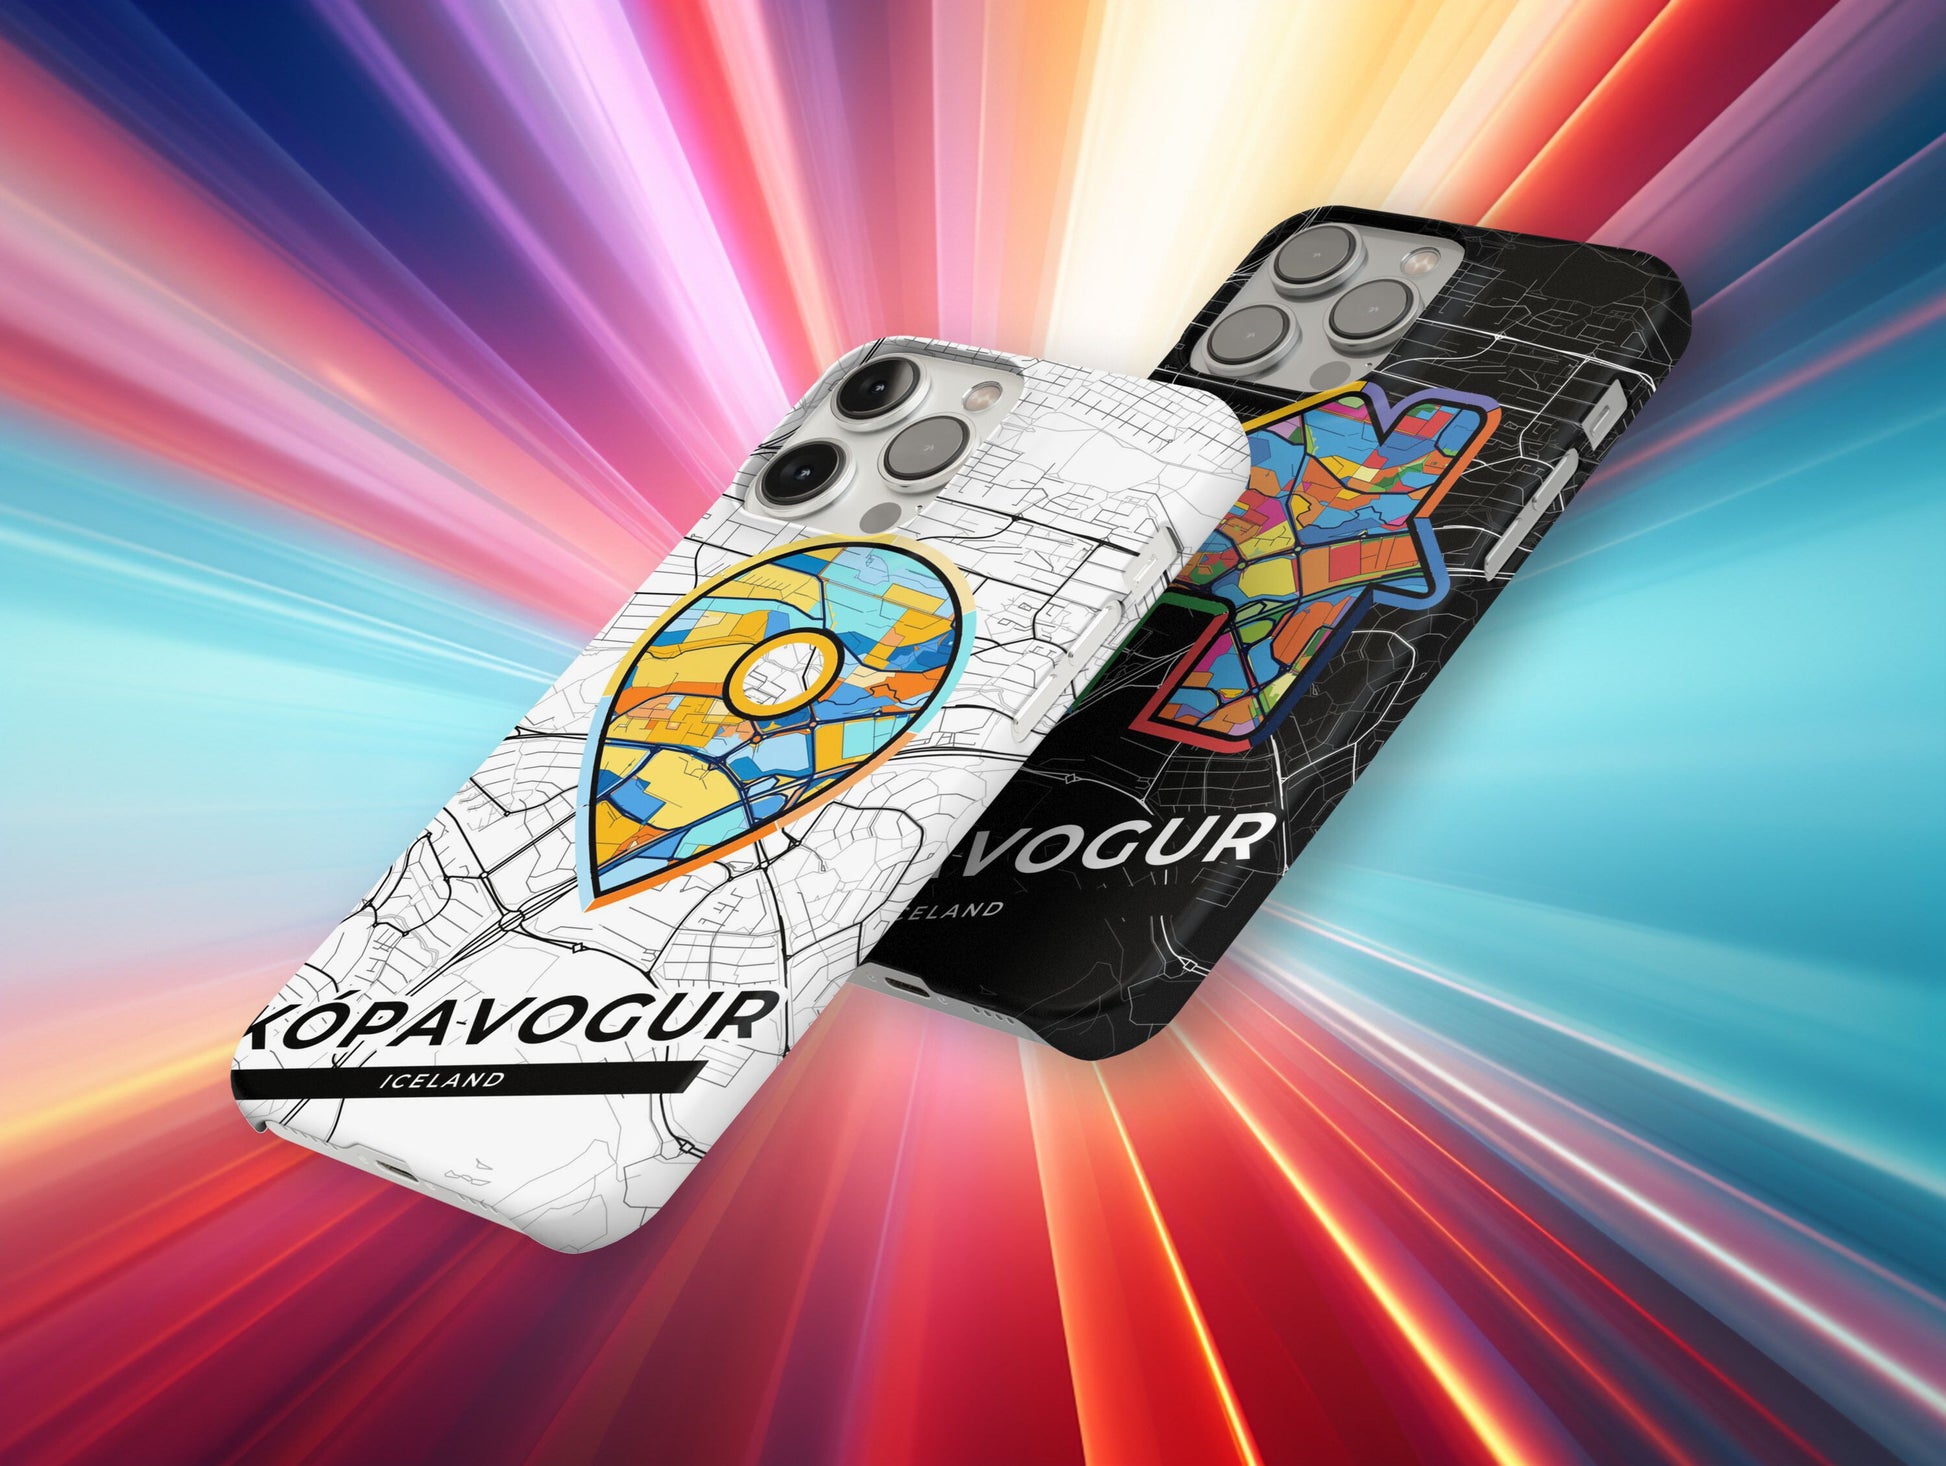 Kópavogur Iceland slim phone case with colorful icon. Birthday, wedding or housewarming gift. Couple match cases.